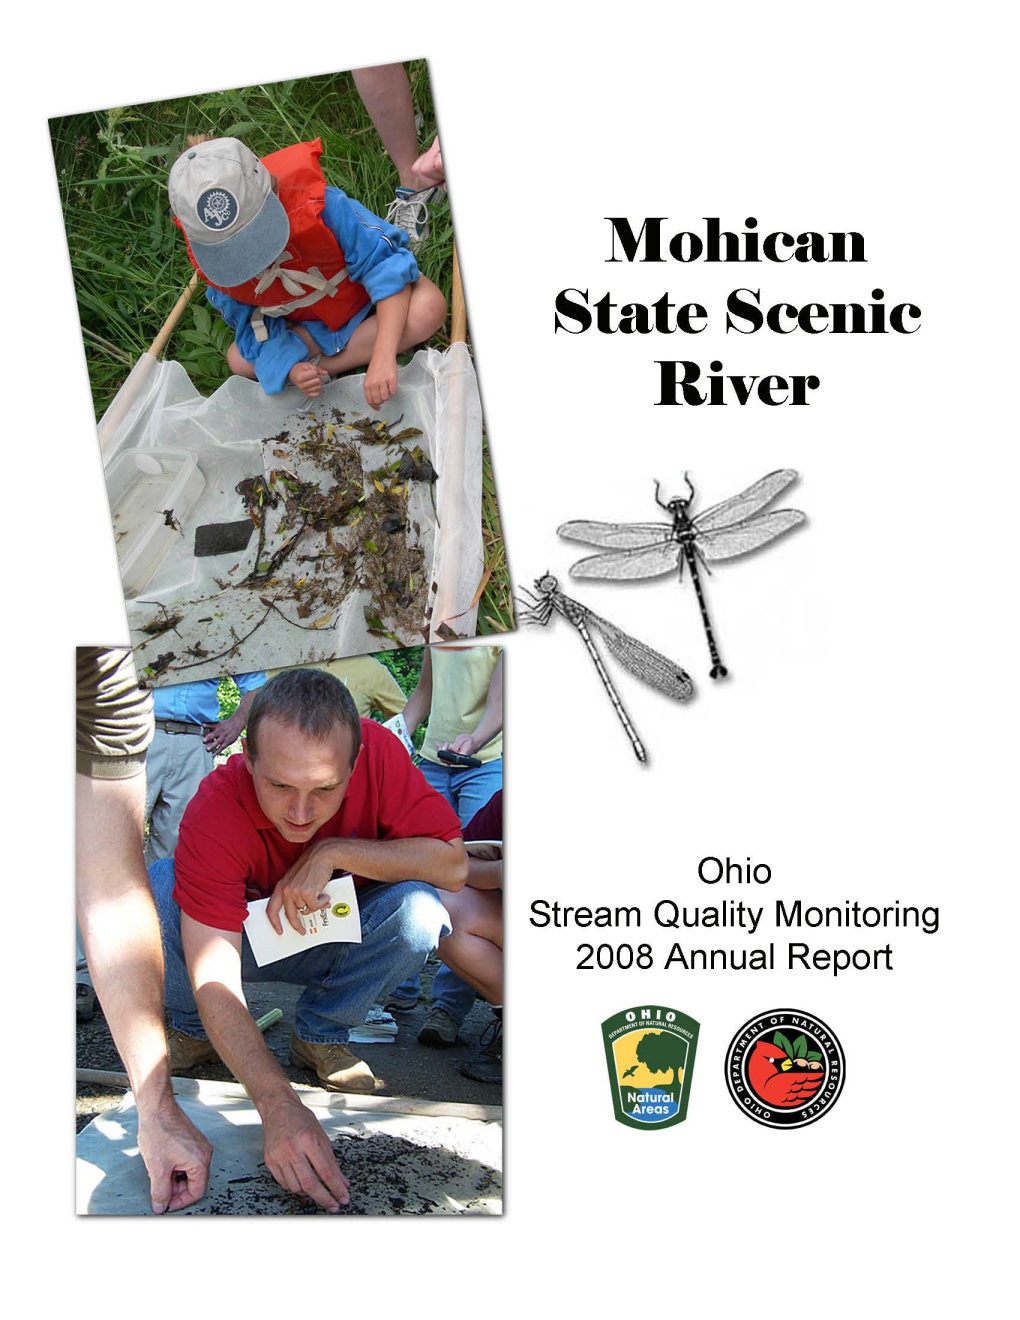 Mohican State Scenic River 2008 Stream Quality Monitoring Annual Report